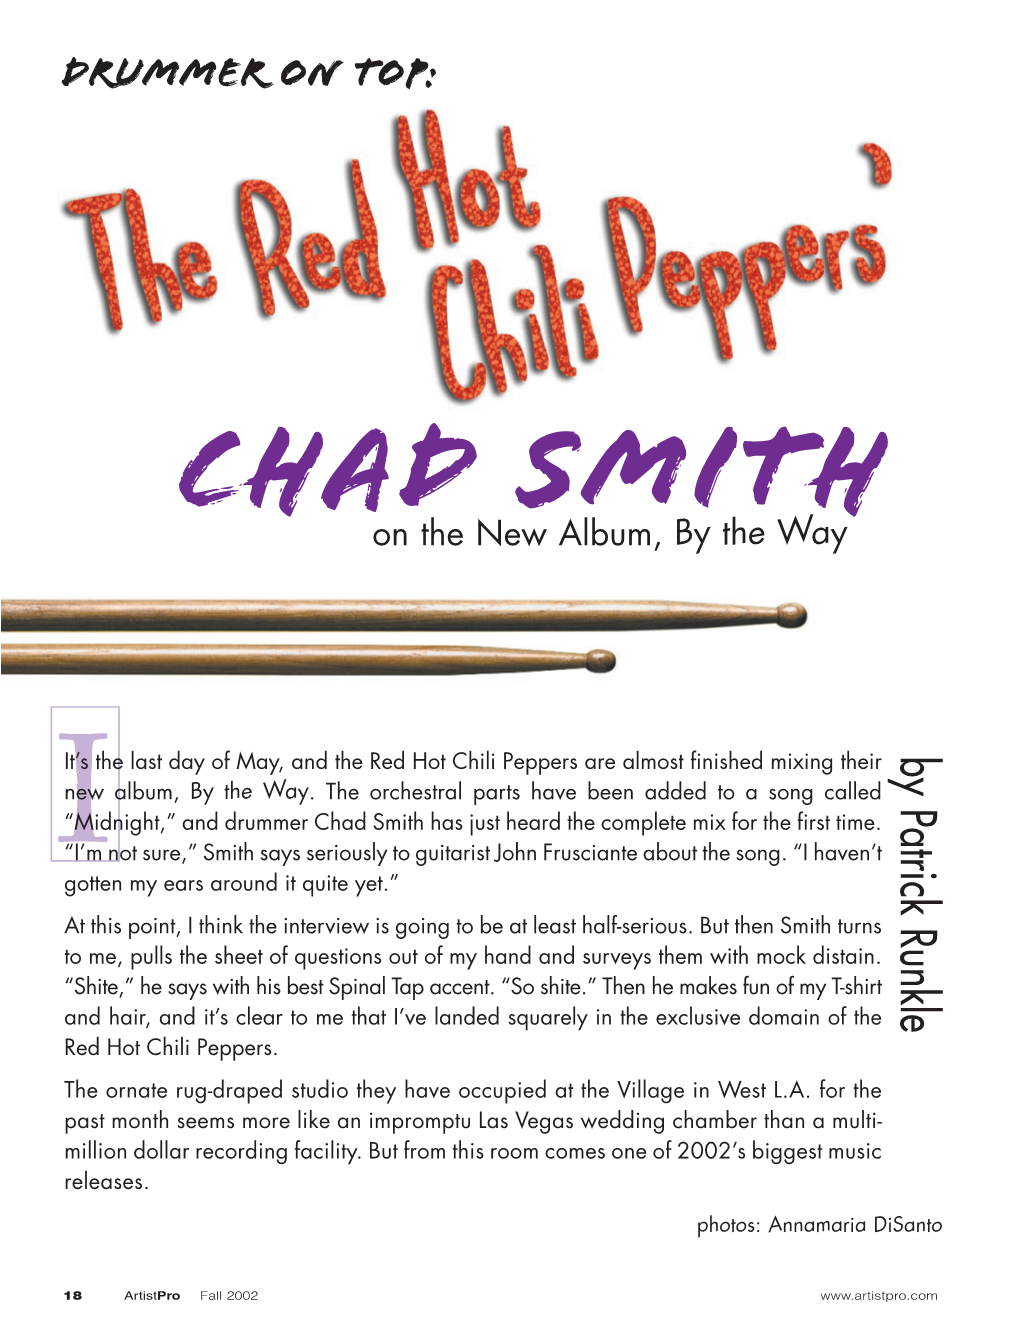 CHAD SMITH on the New Album, by the Way